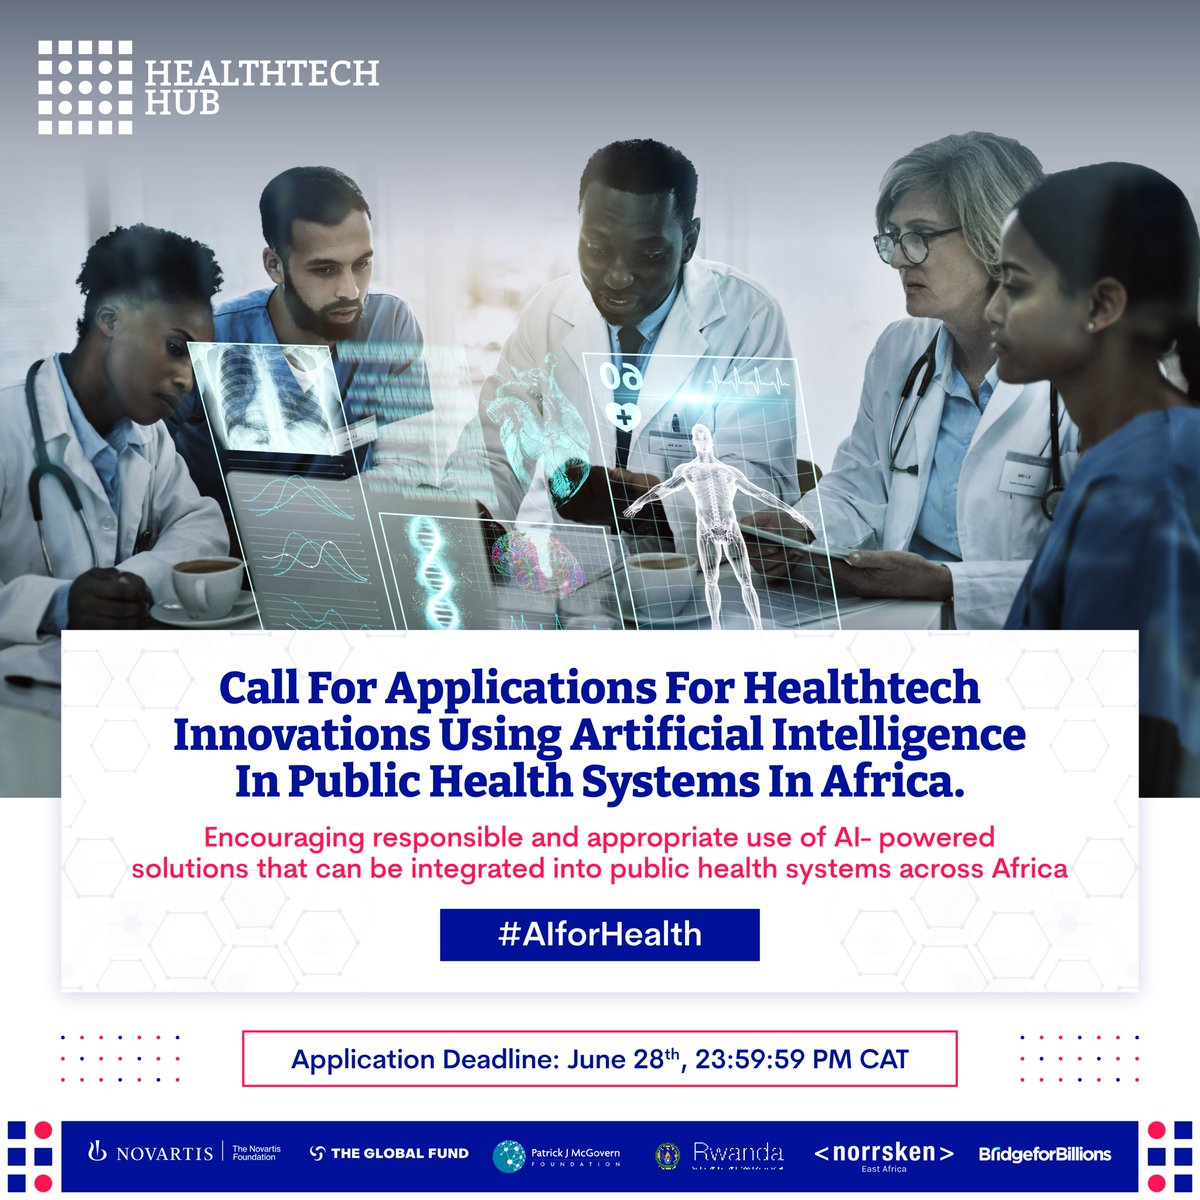 Funding Opportunity for HealthTech Innovations in Africa!
We are thrilled to announce the launch of the #AIforHealth challenge, a collaboration between the HealthTech Hub Africa and The Patrick J. McGovern Foundation.
#AIforHealthChallenge #HealthTechInnovation